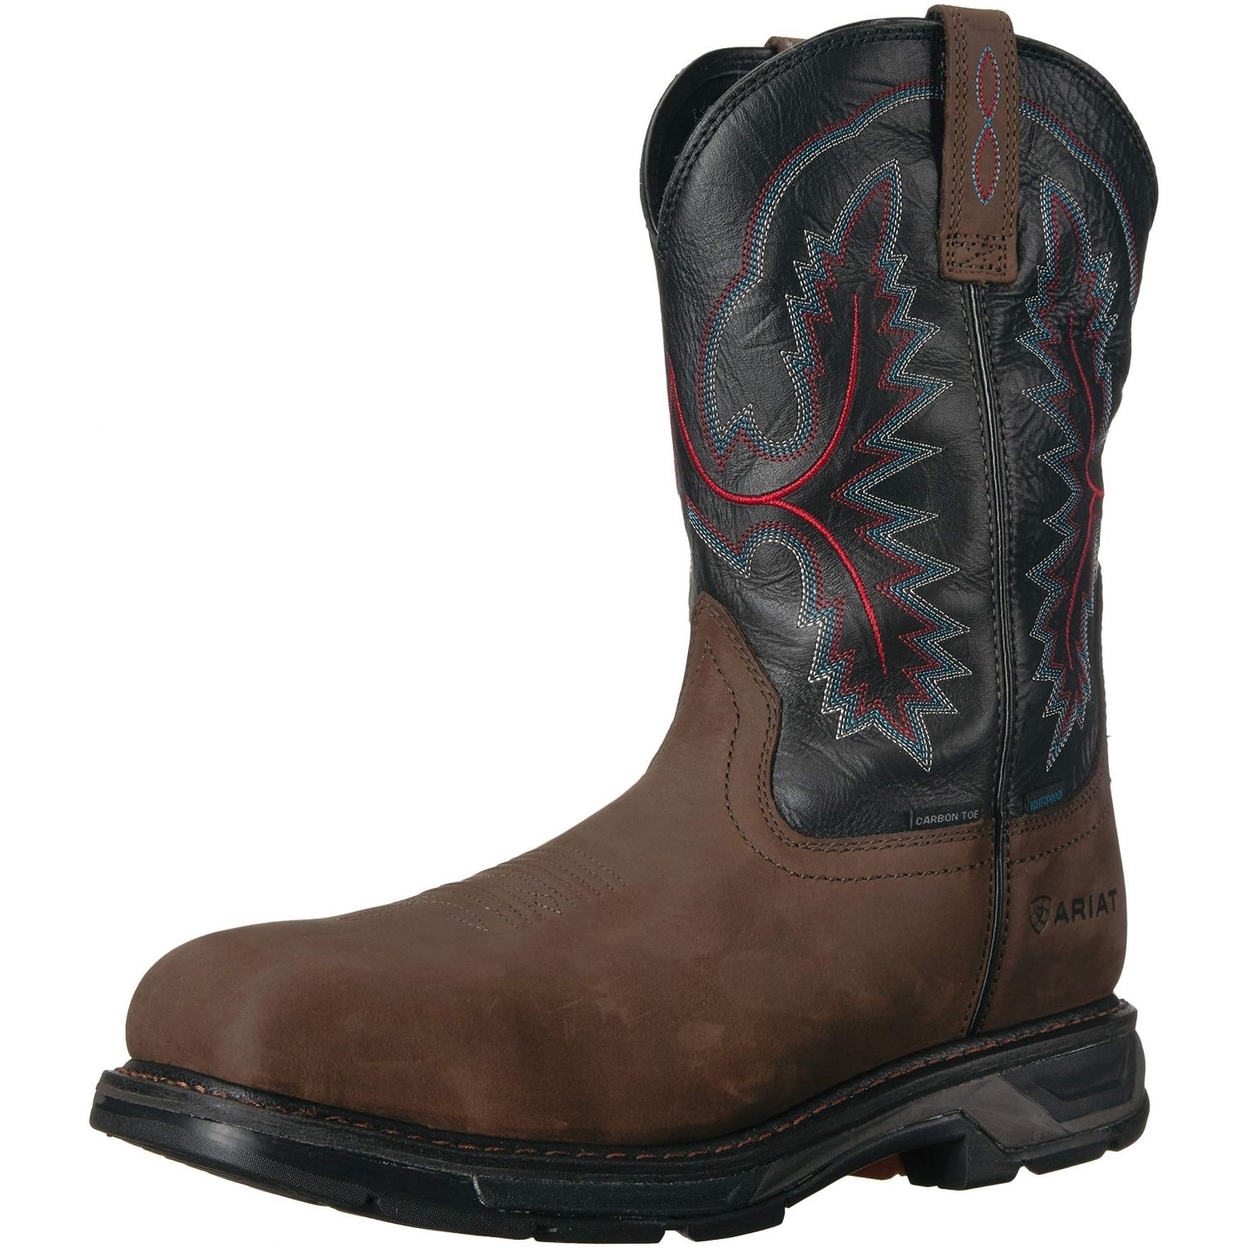 Ariat Work Men's Workhog XT H2O Carbon Toe Western Boot ONE SIZE BRK/ FOREST - BRK/ FOREST, 8.5-D